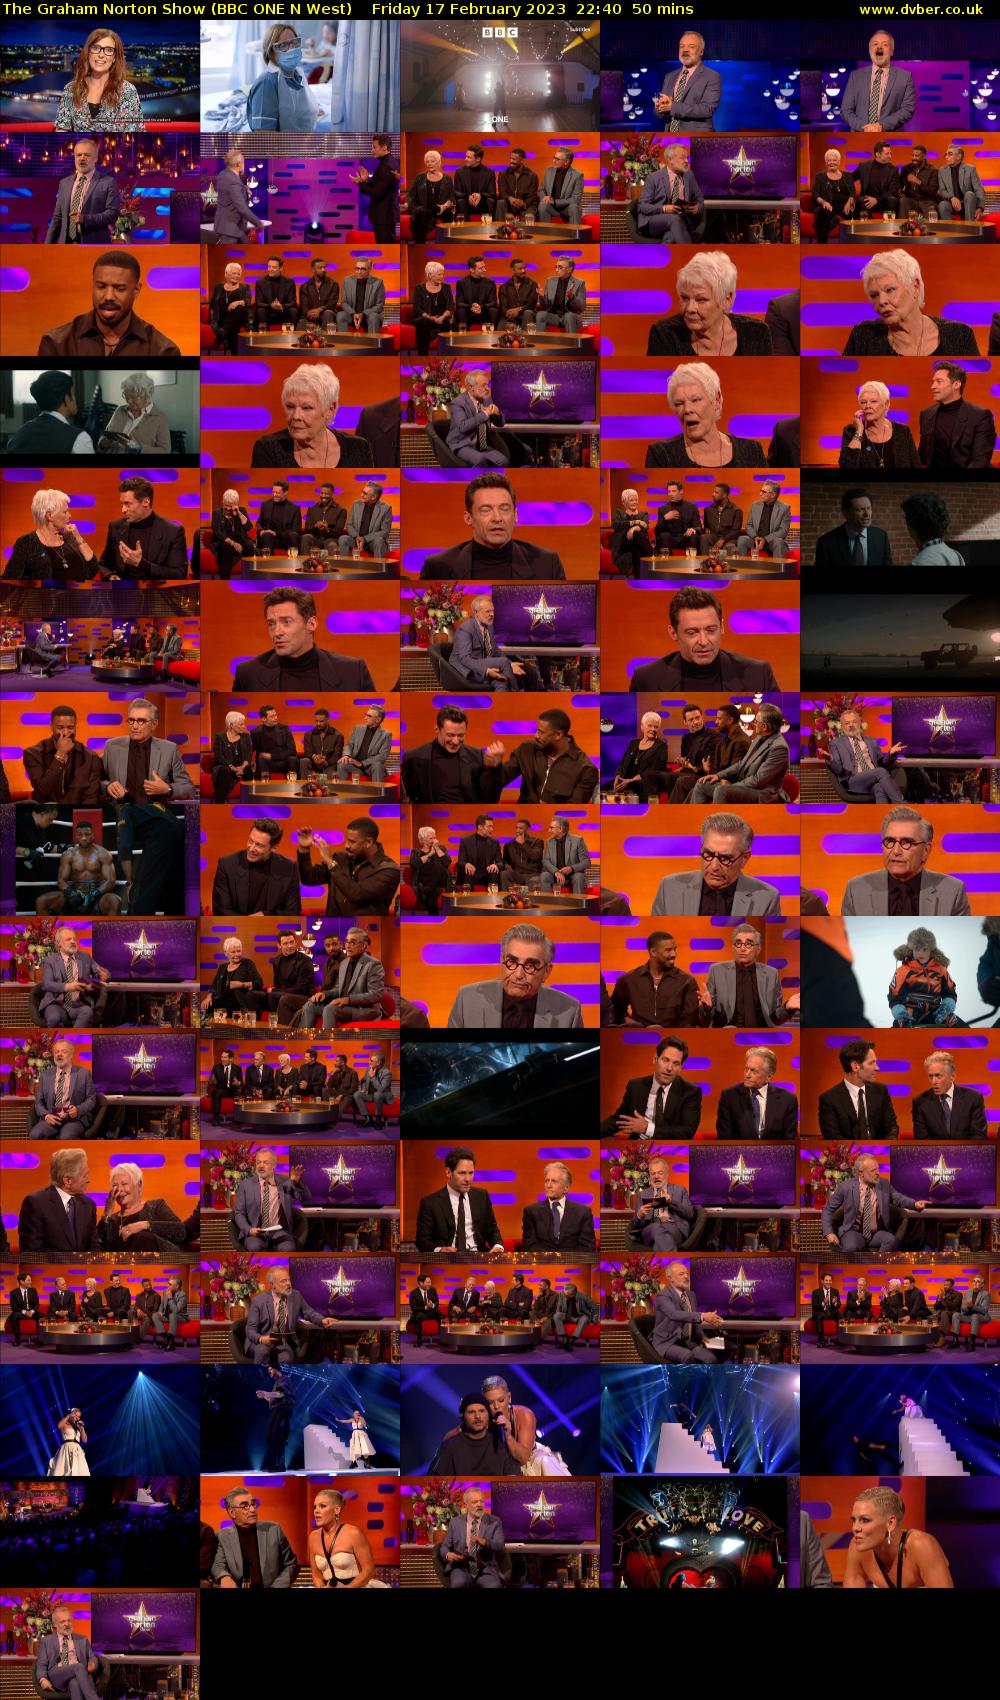 The Graham Norton Show (BBC ONE N West) Friday 17 February 2023 22:40 - 23:30